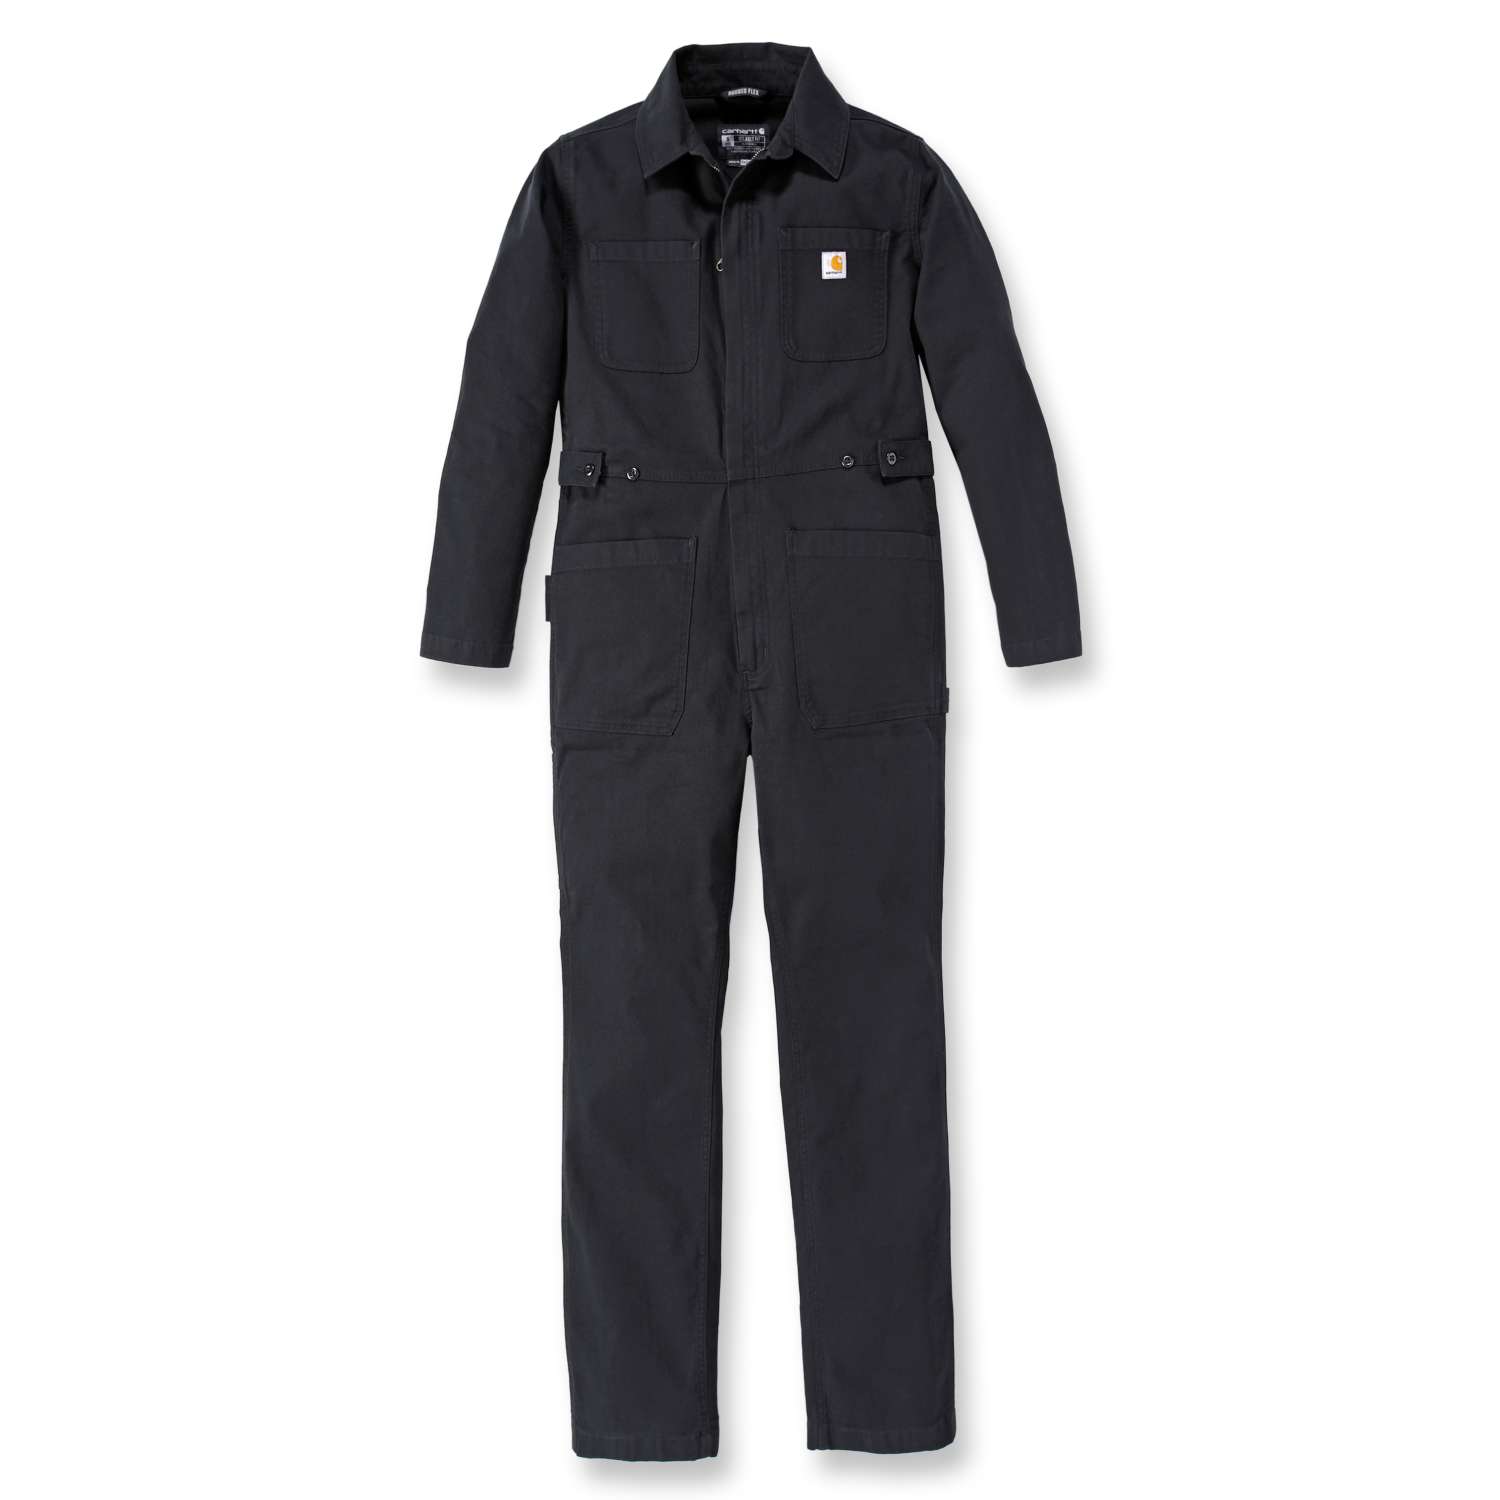 RELAXED_FIT_CANVAS_COVERALL_Xp4yf4riFe